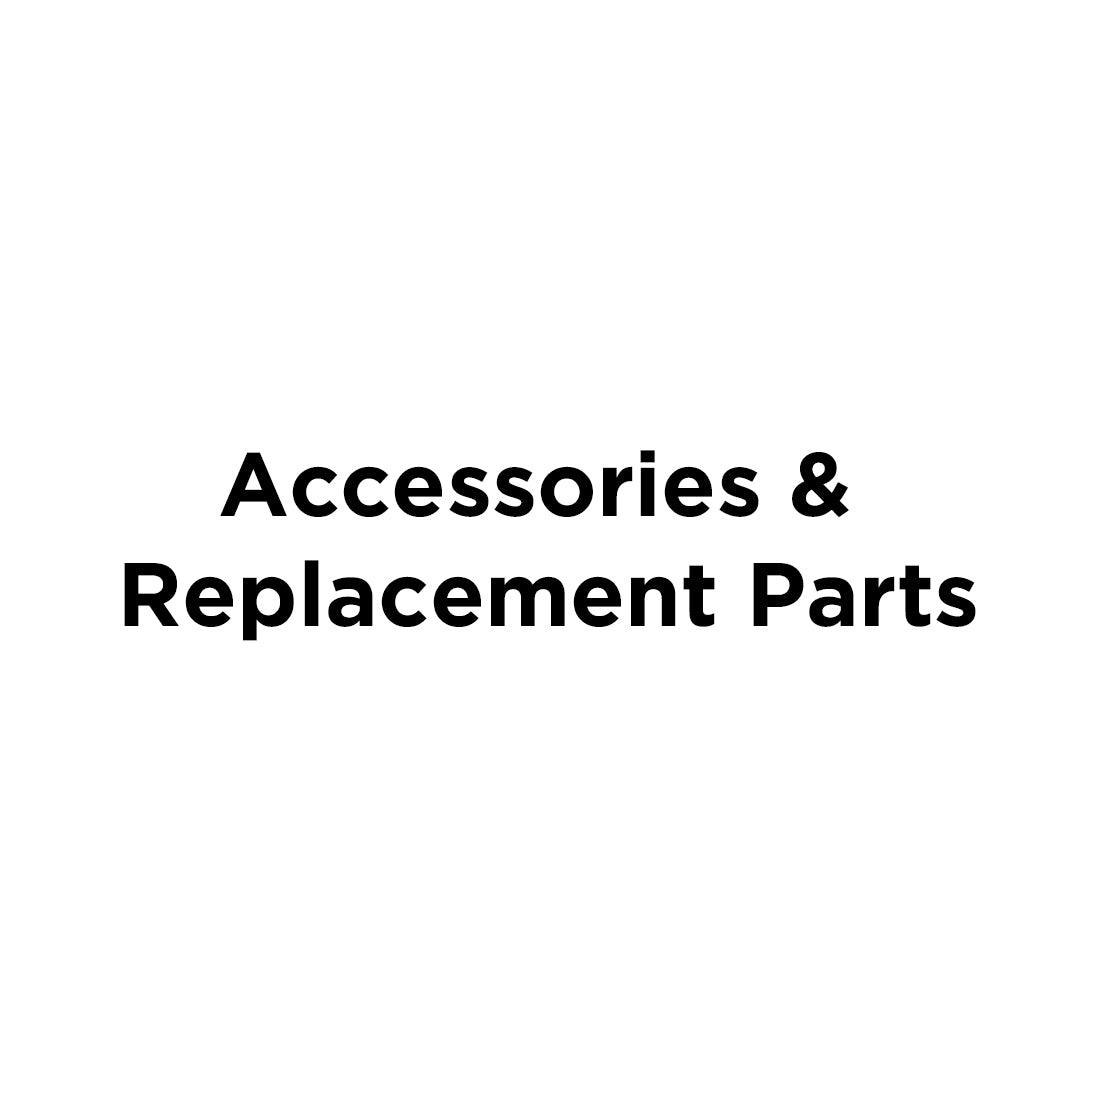 Spare parts - Accessories - Products